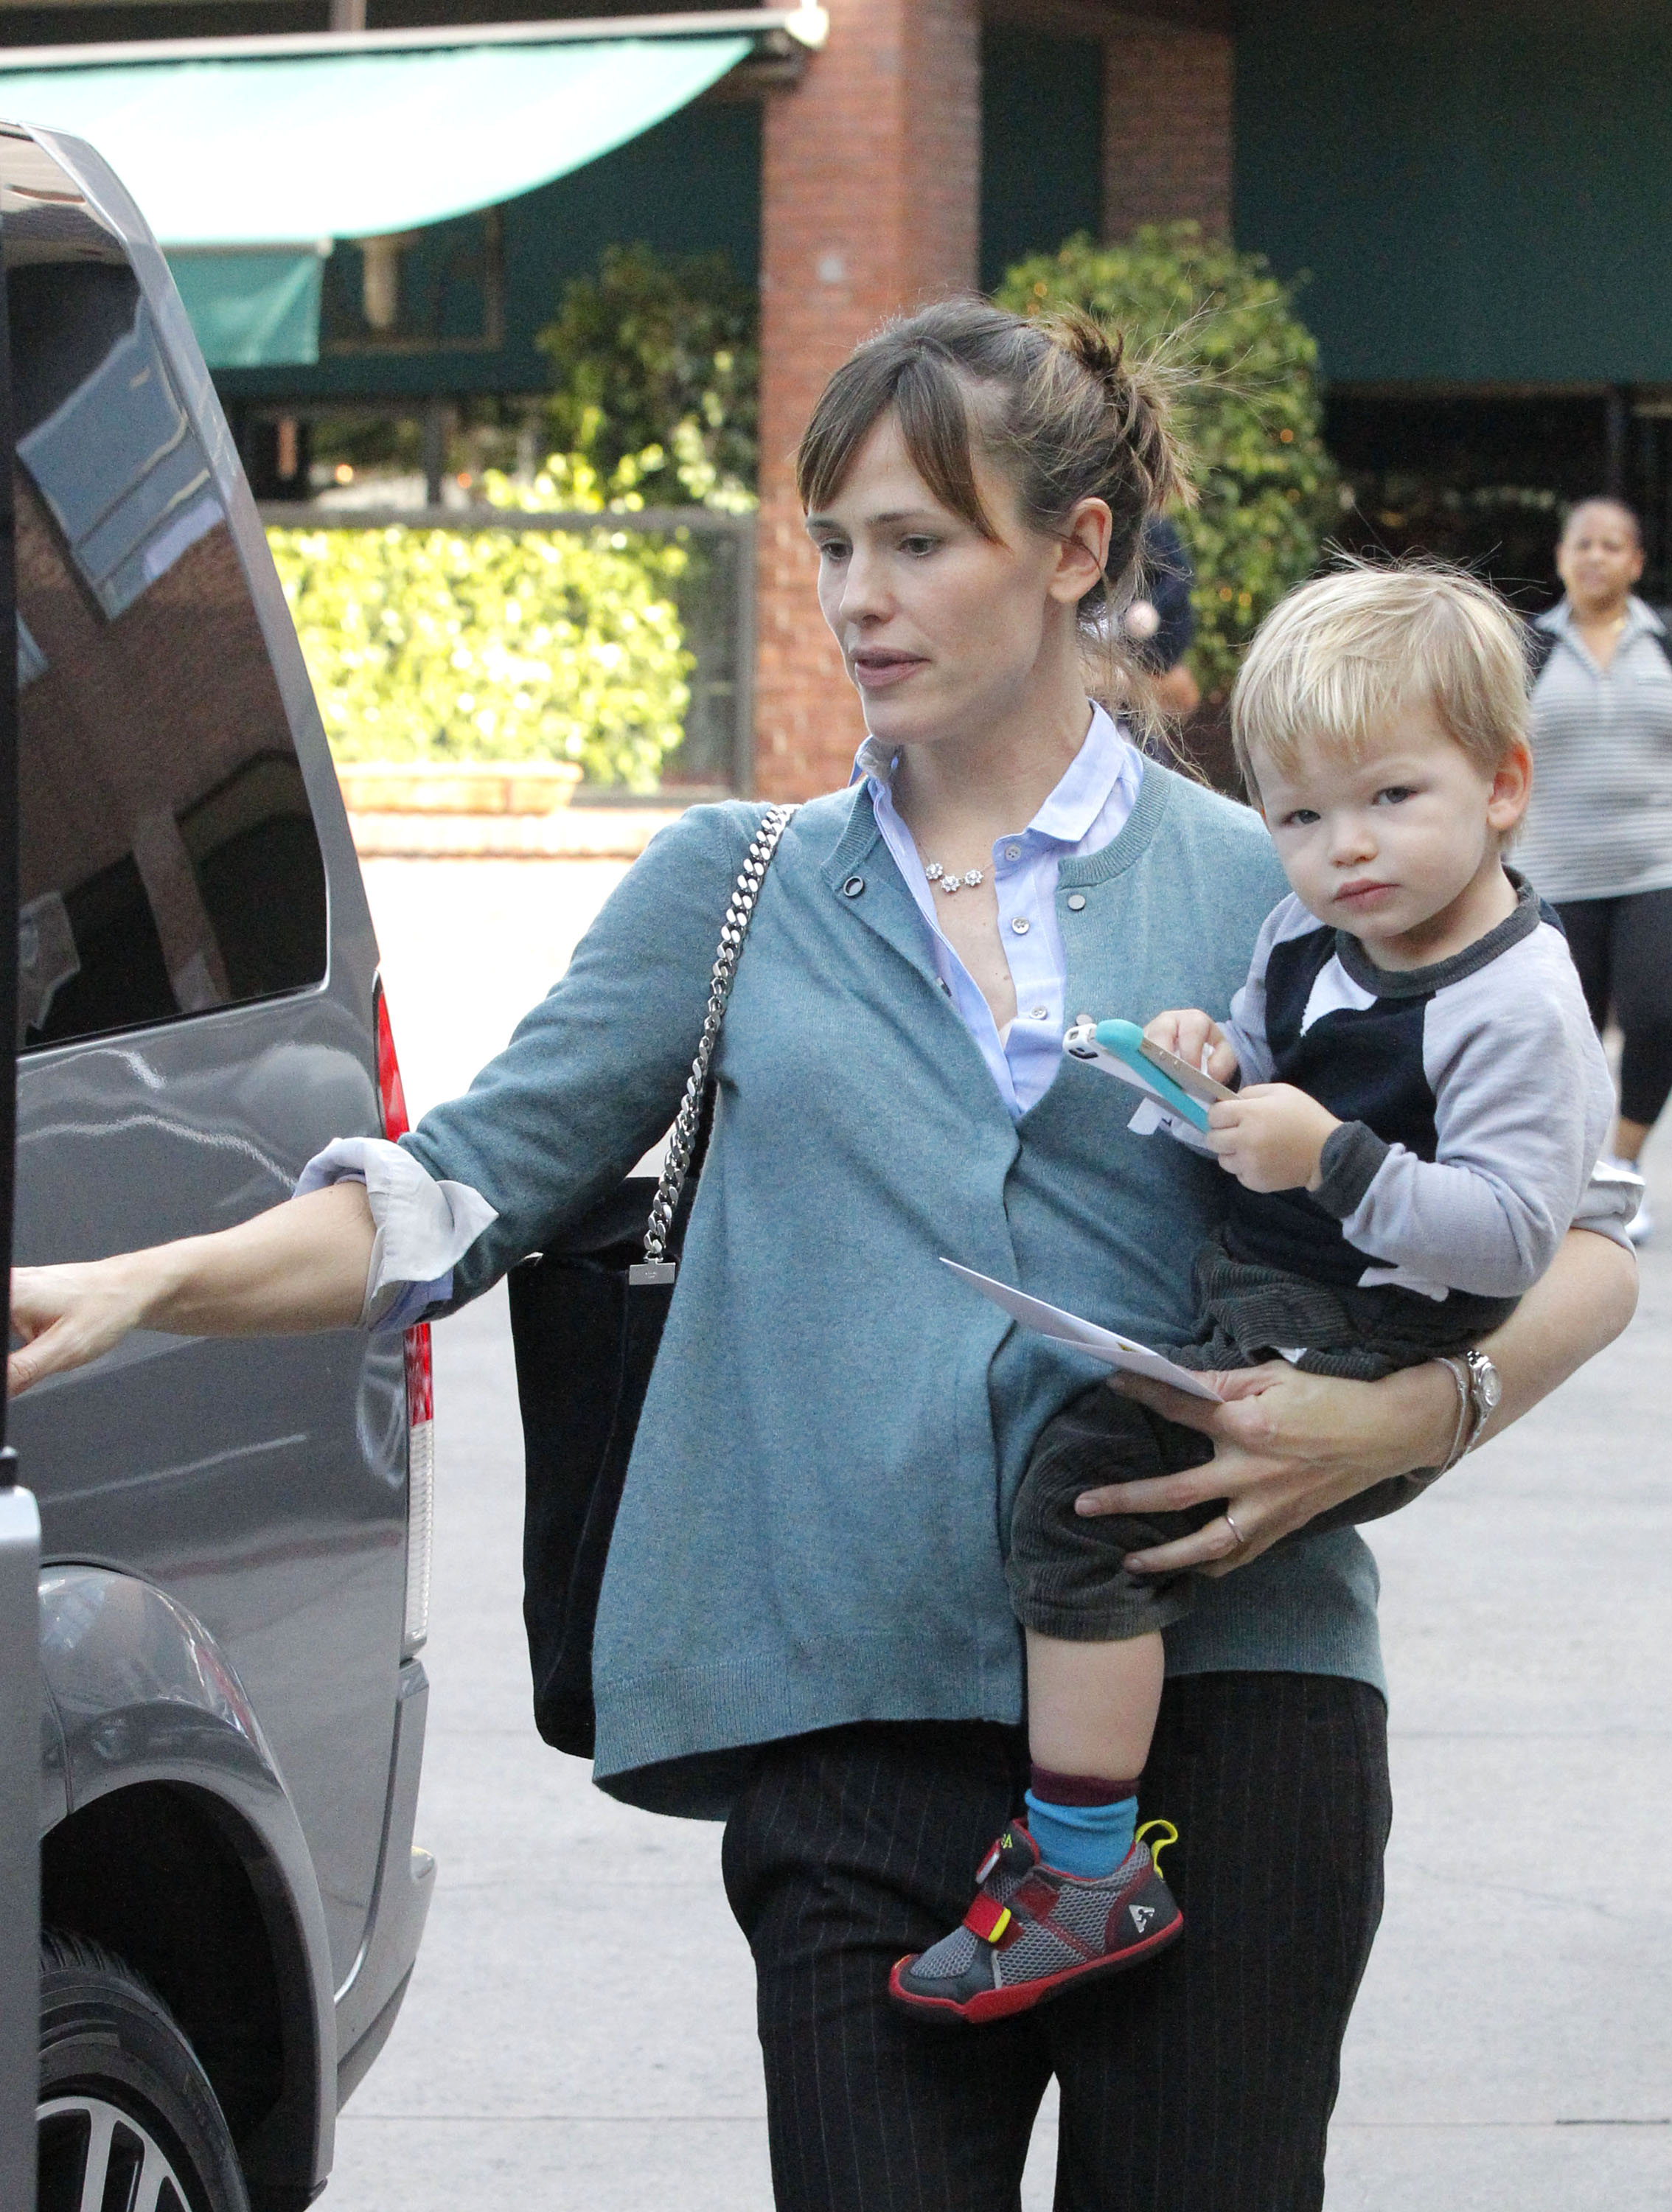 Jennifer Garner is seen carrying her son, Samuel Affleck, on December 17, 2013, in the Brentwood neighborhood of Los Angeles, California. | Source: Getty Images